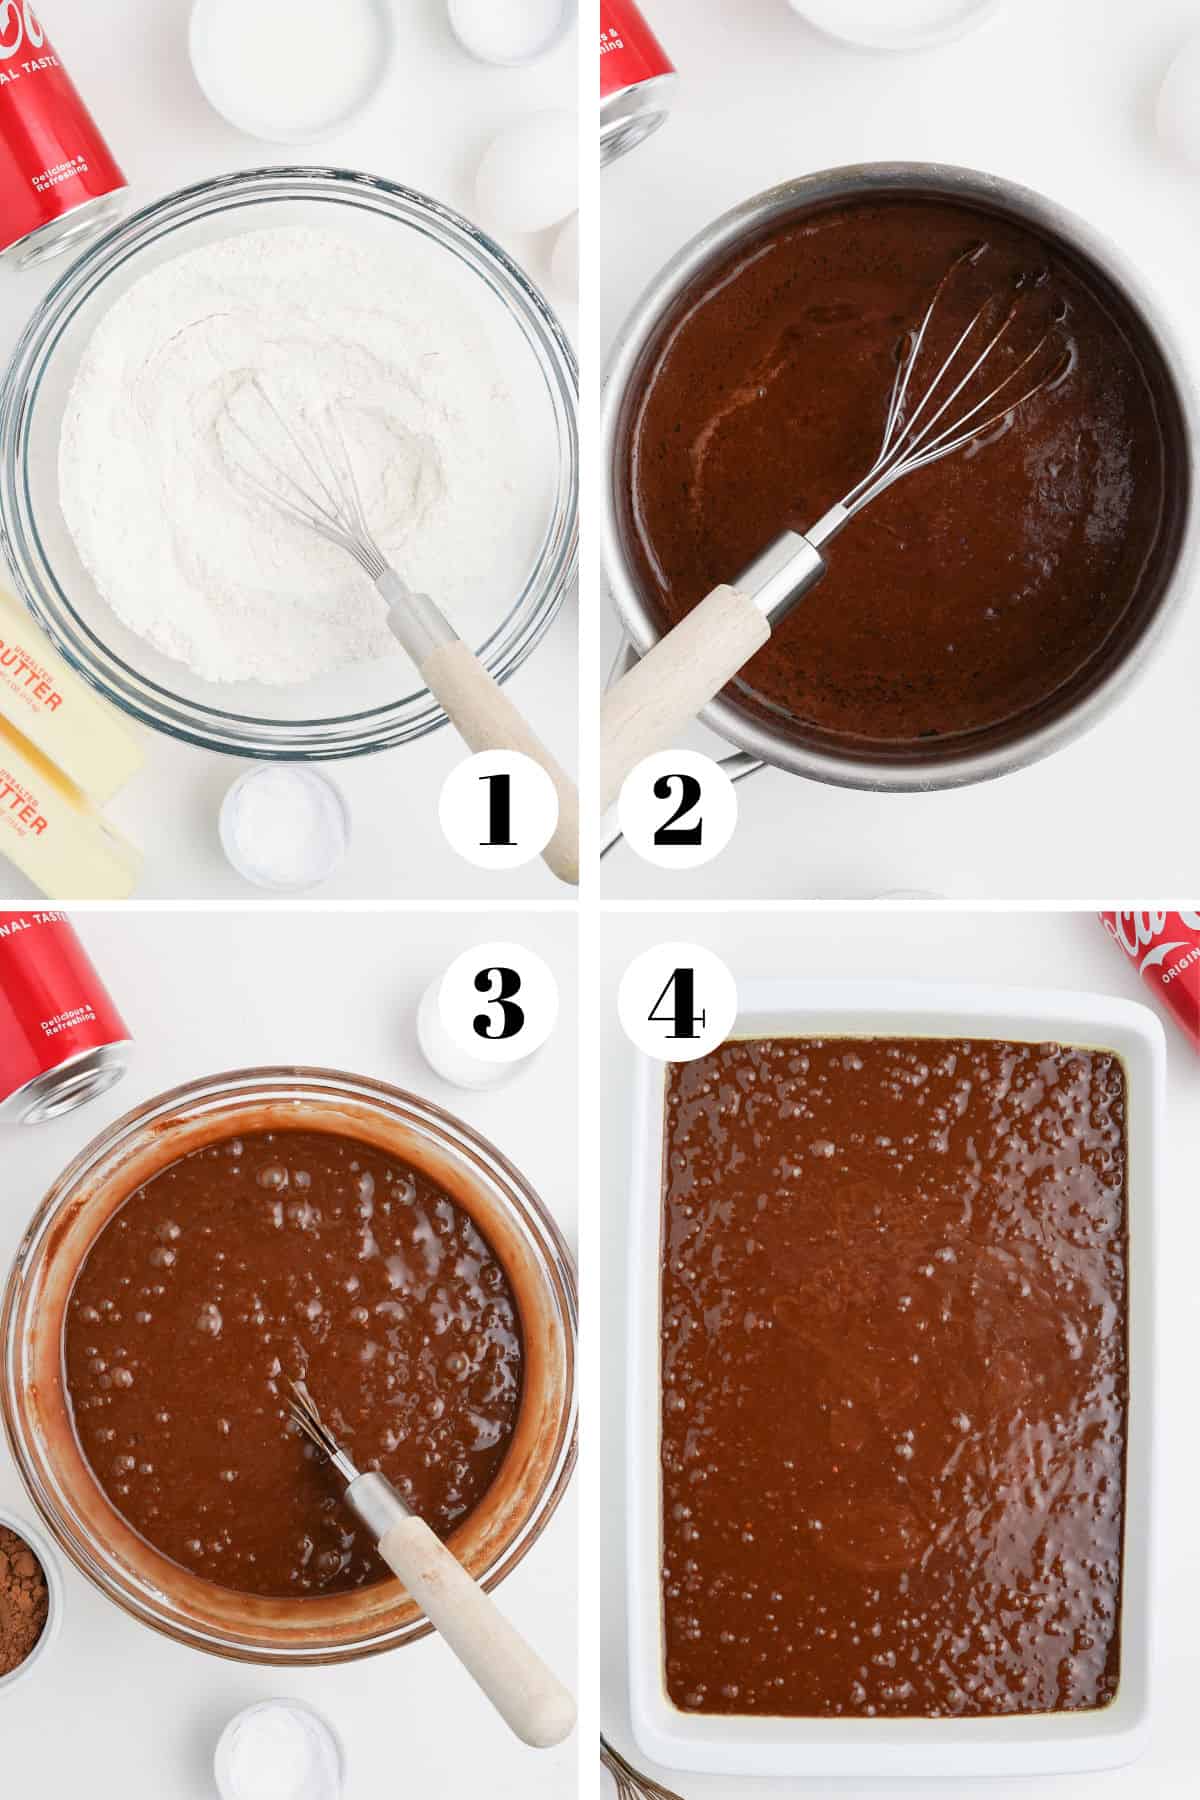 Step by step photos showing how to make coca cola cake.